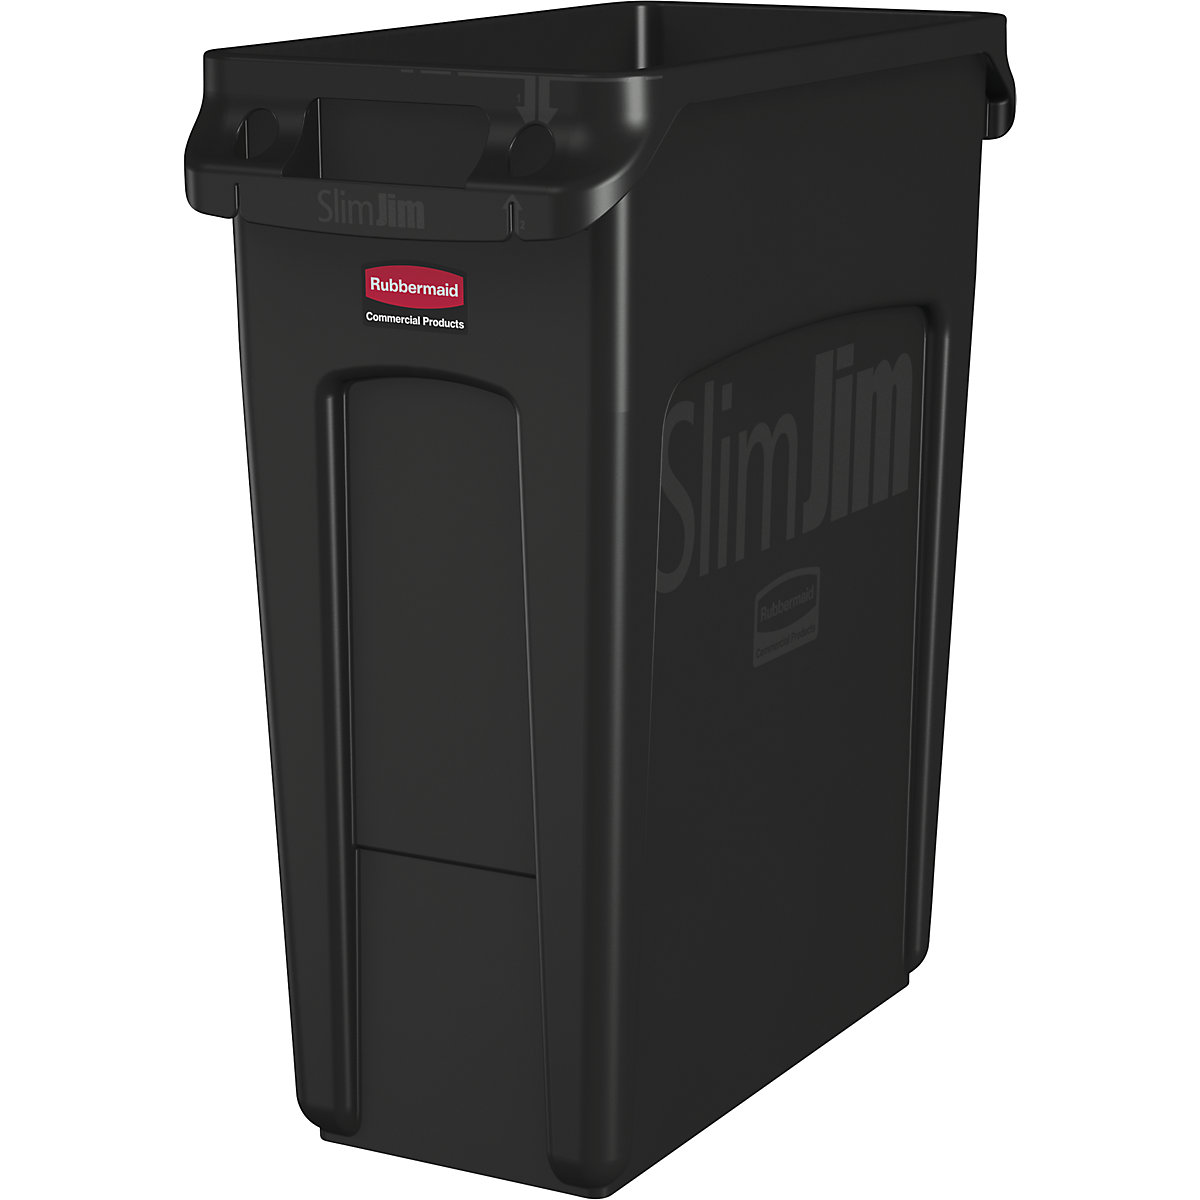 SLIM JIM® recyclable waste collector/waste bin – Rubbermaid, capacity 60 l, with ventilation ducts, black, 10+ items-9